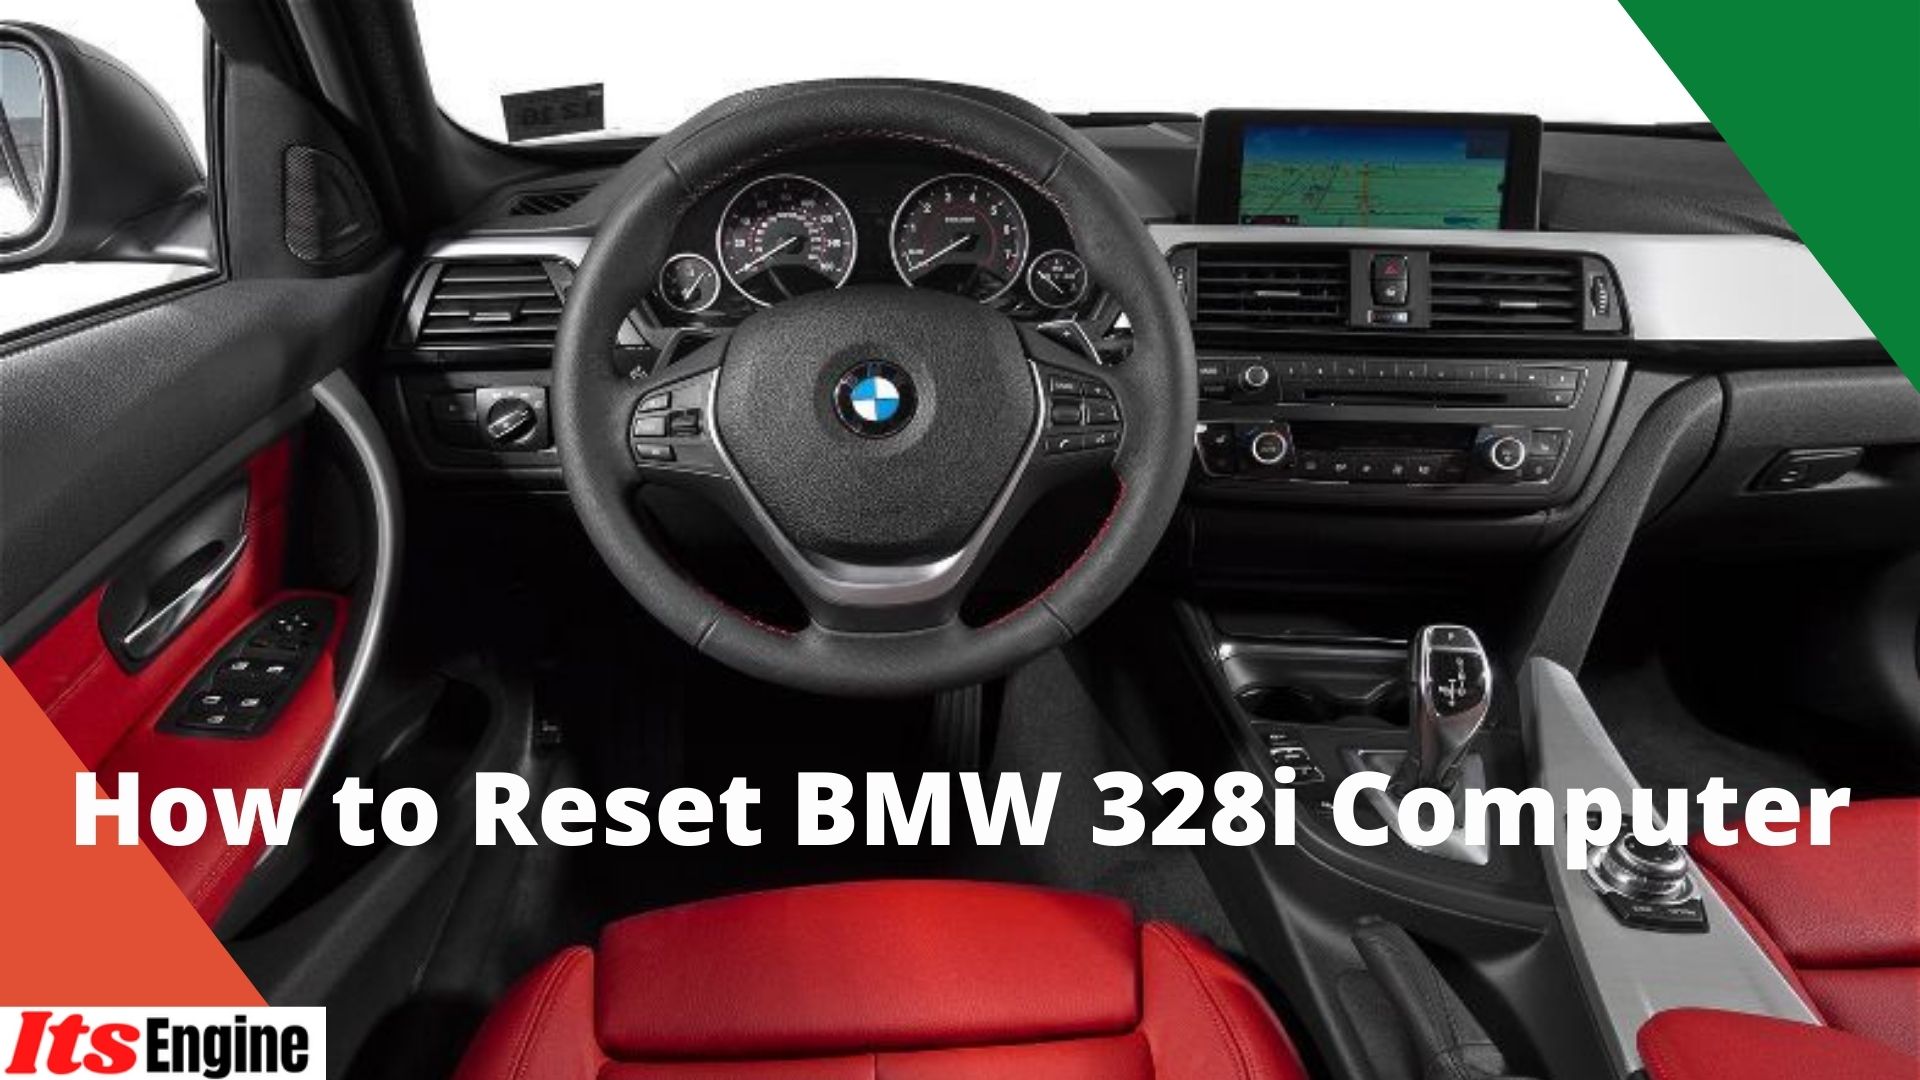 How to Reset BMW 328i Computer?